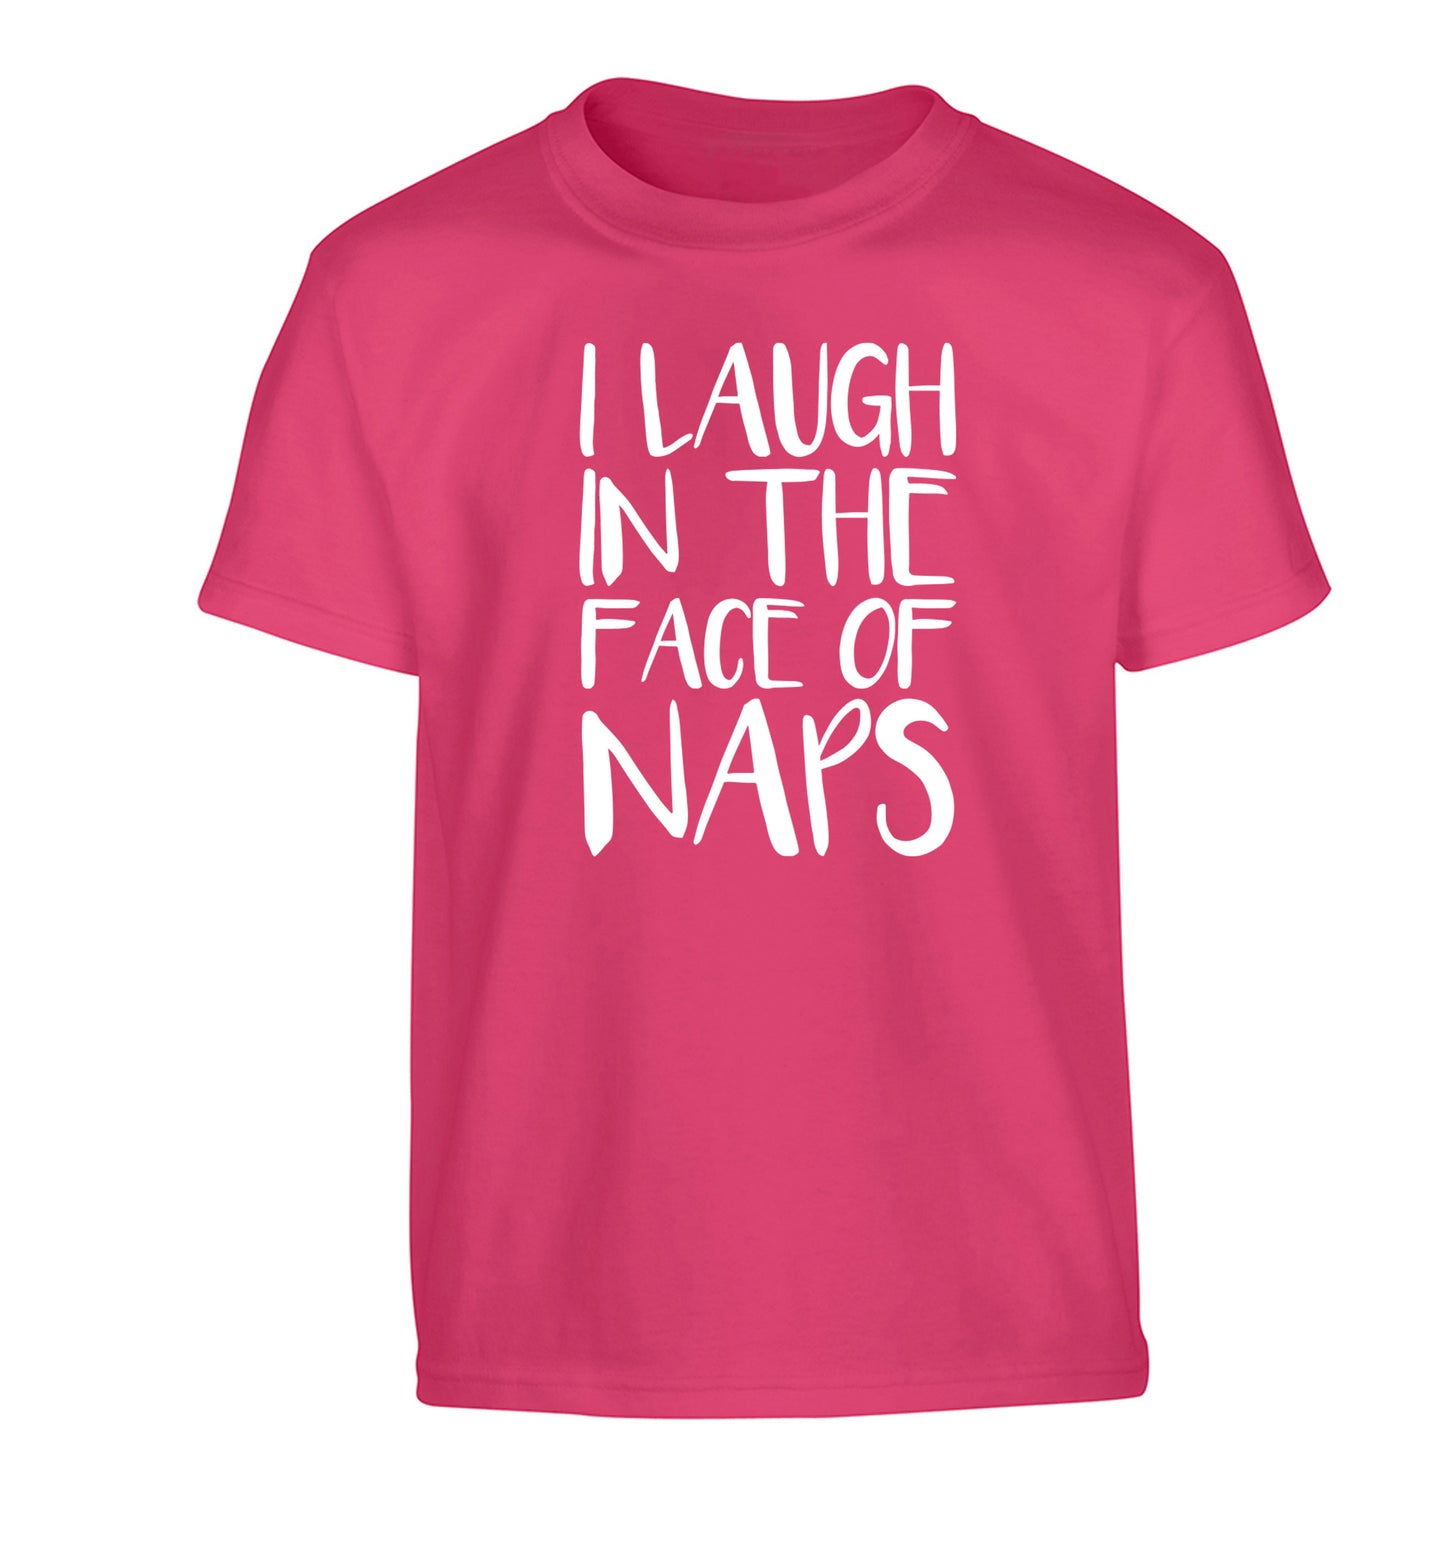 I laugh in the face of naps Children's pink Tshirt 12-14 Years